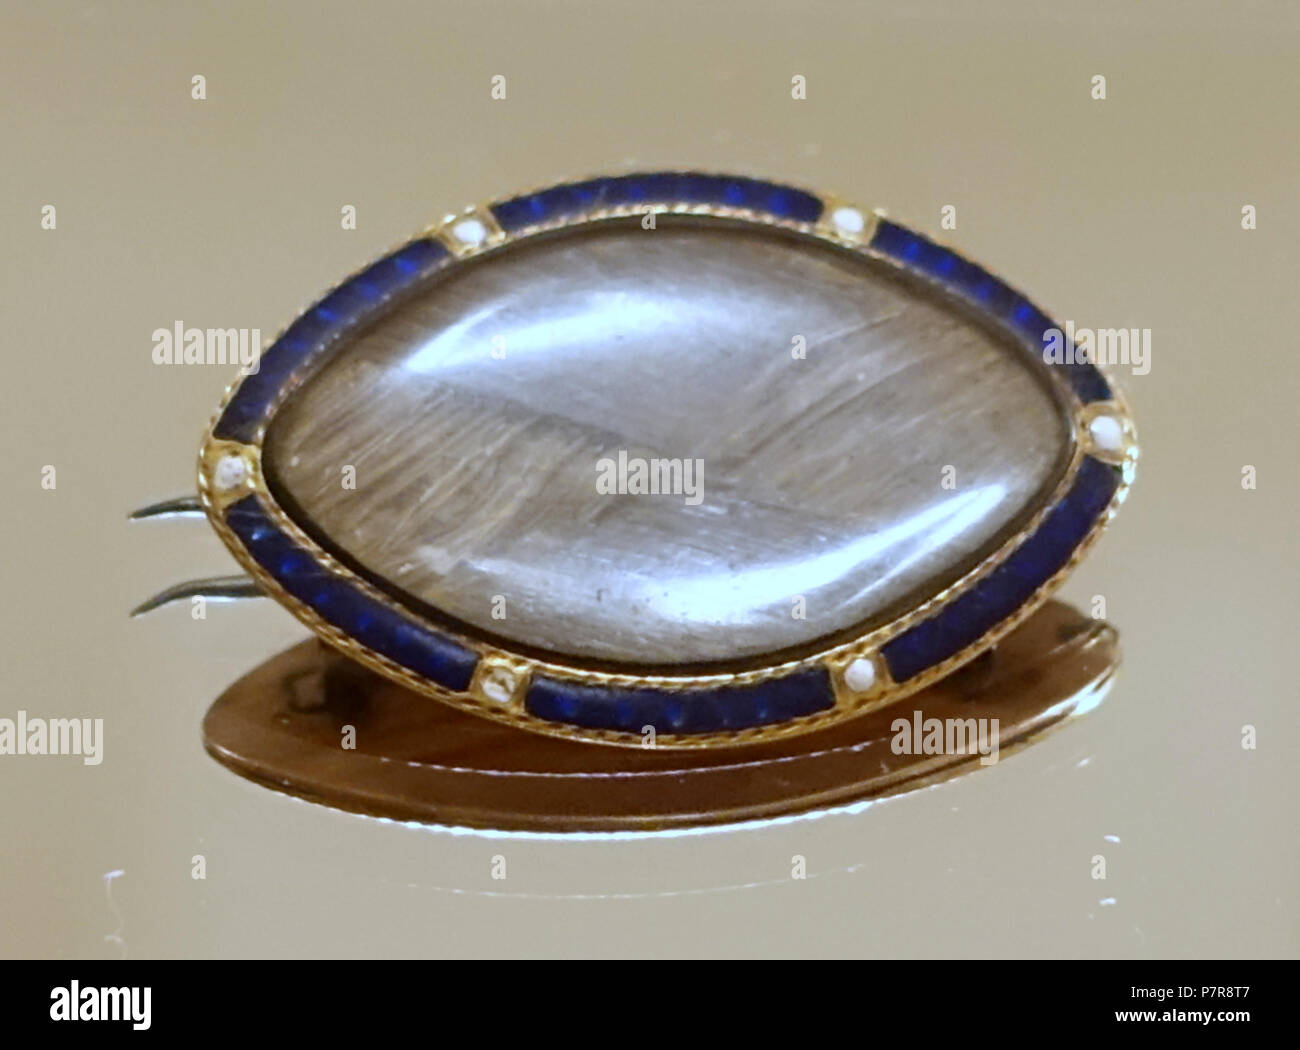 English: Exhibit in the O. Henry Museum - Austin, Texas, USA. This work is old enough so that it is in the . 19 November 2015, 15:03:56 55 Brooch with hair of Maria Brown Austin, c. 1824-1851 - O. Henry Museum - Austin, Texas - DSC09277 Stock Photo